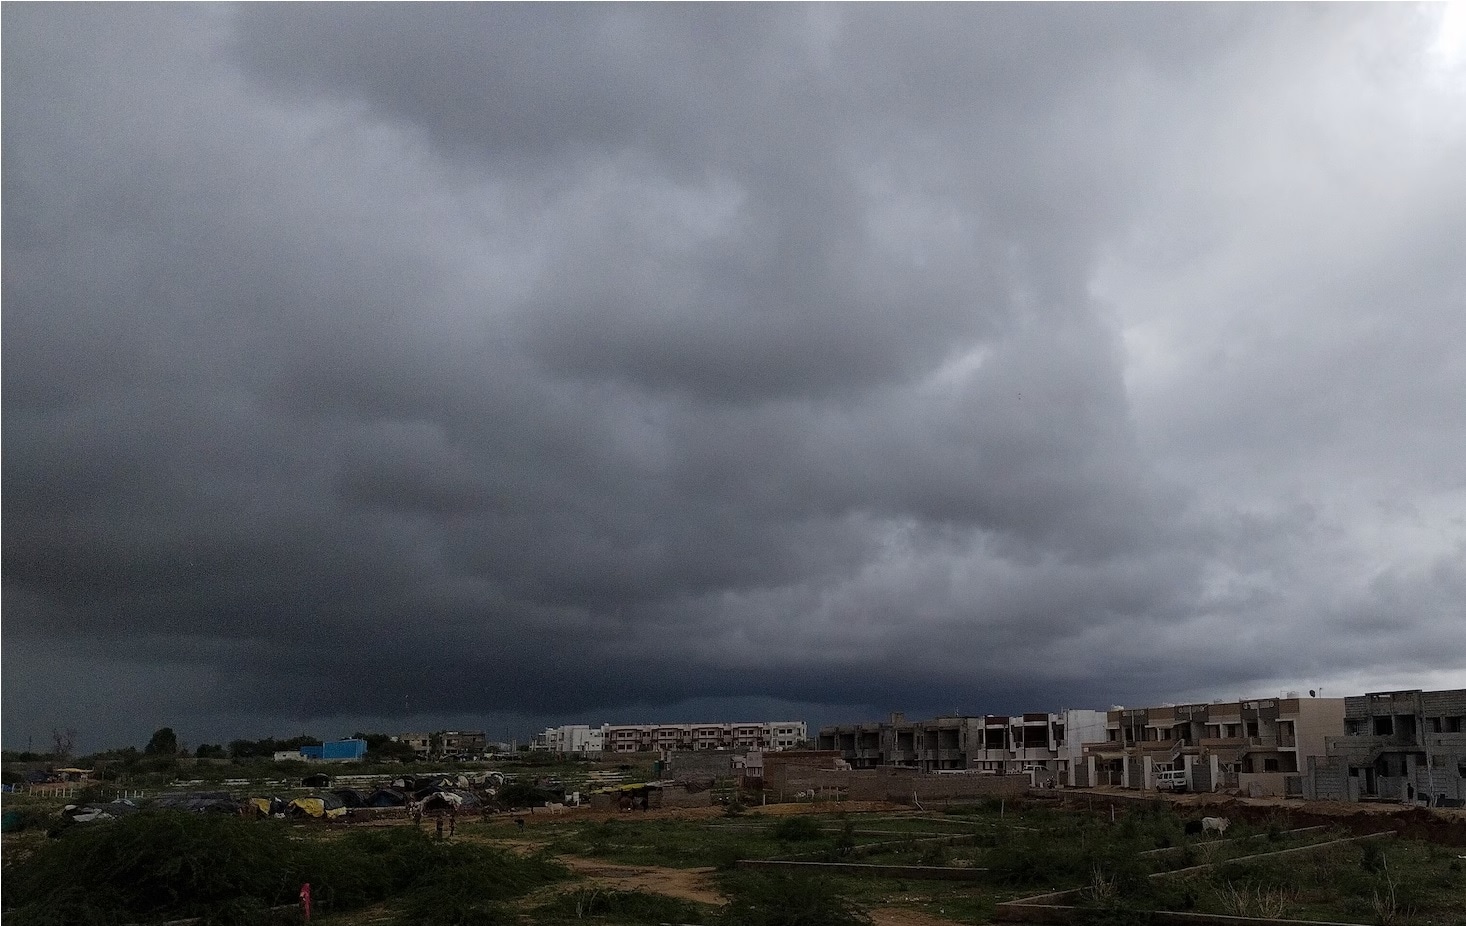 Rain may occur in these districts of Gujarat, Ambalal Patel predicted